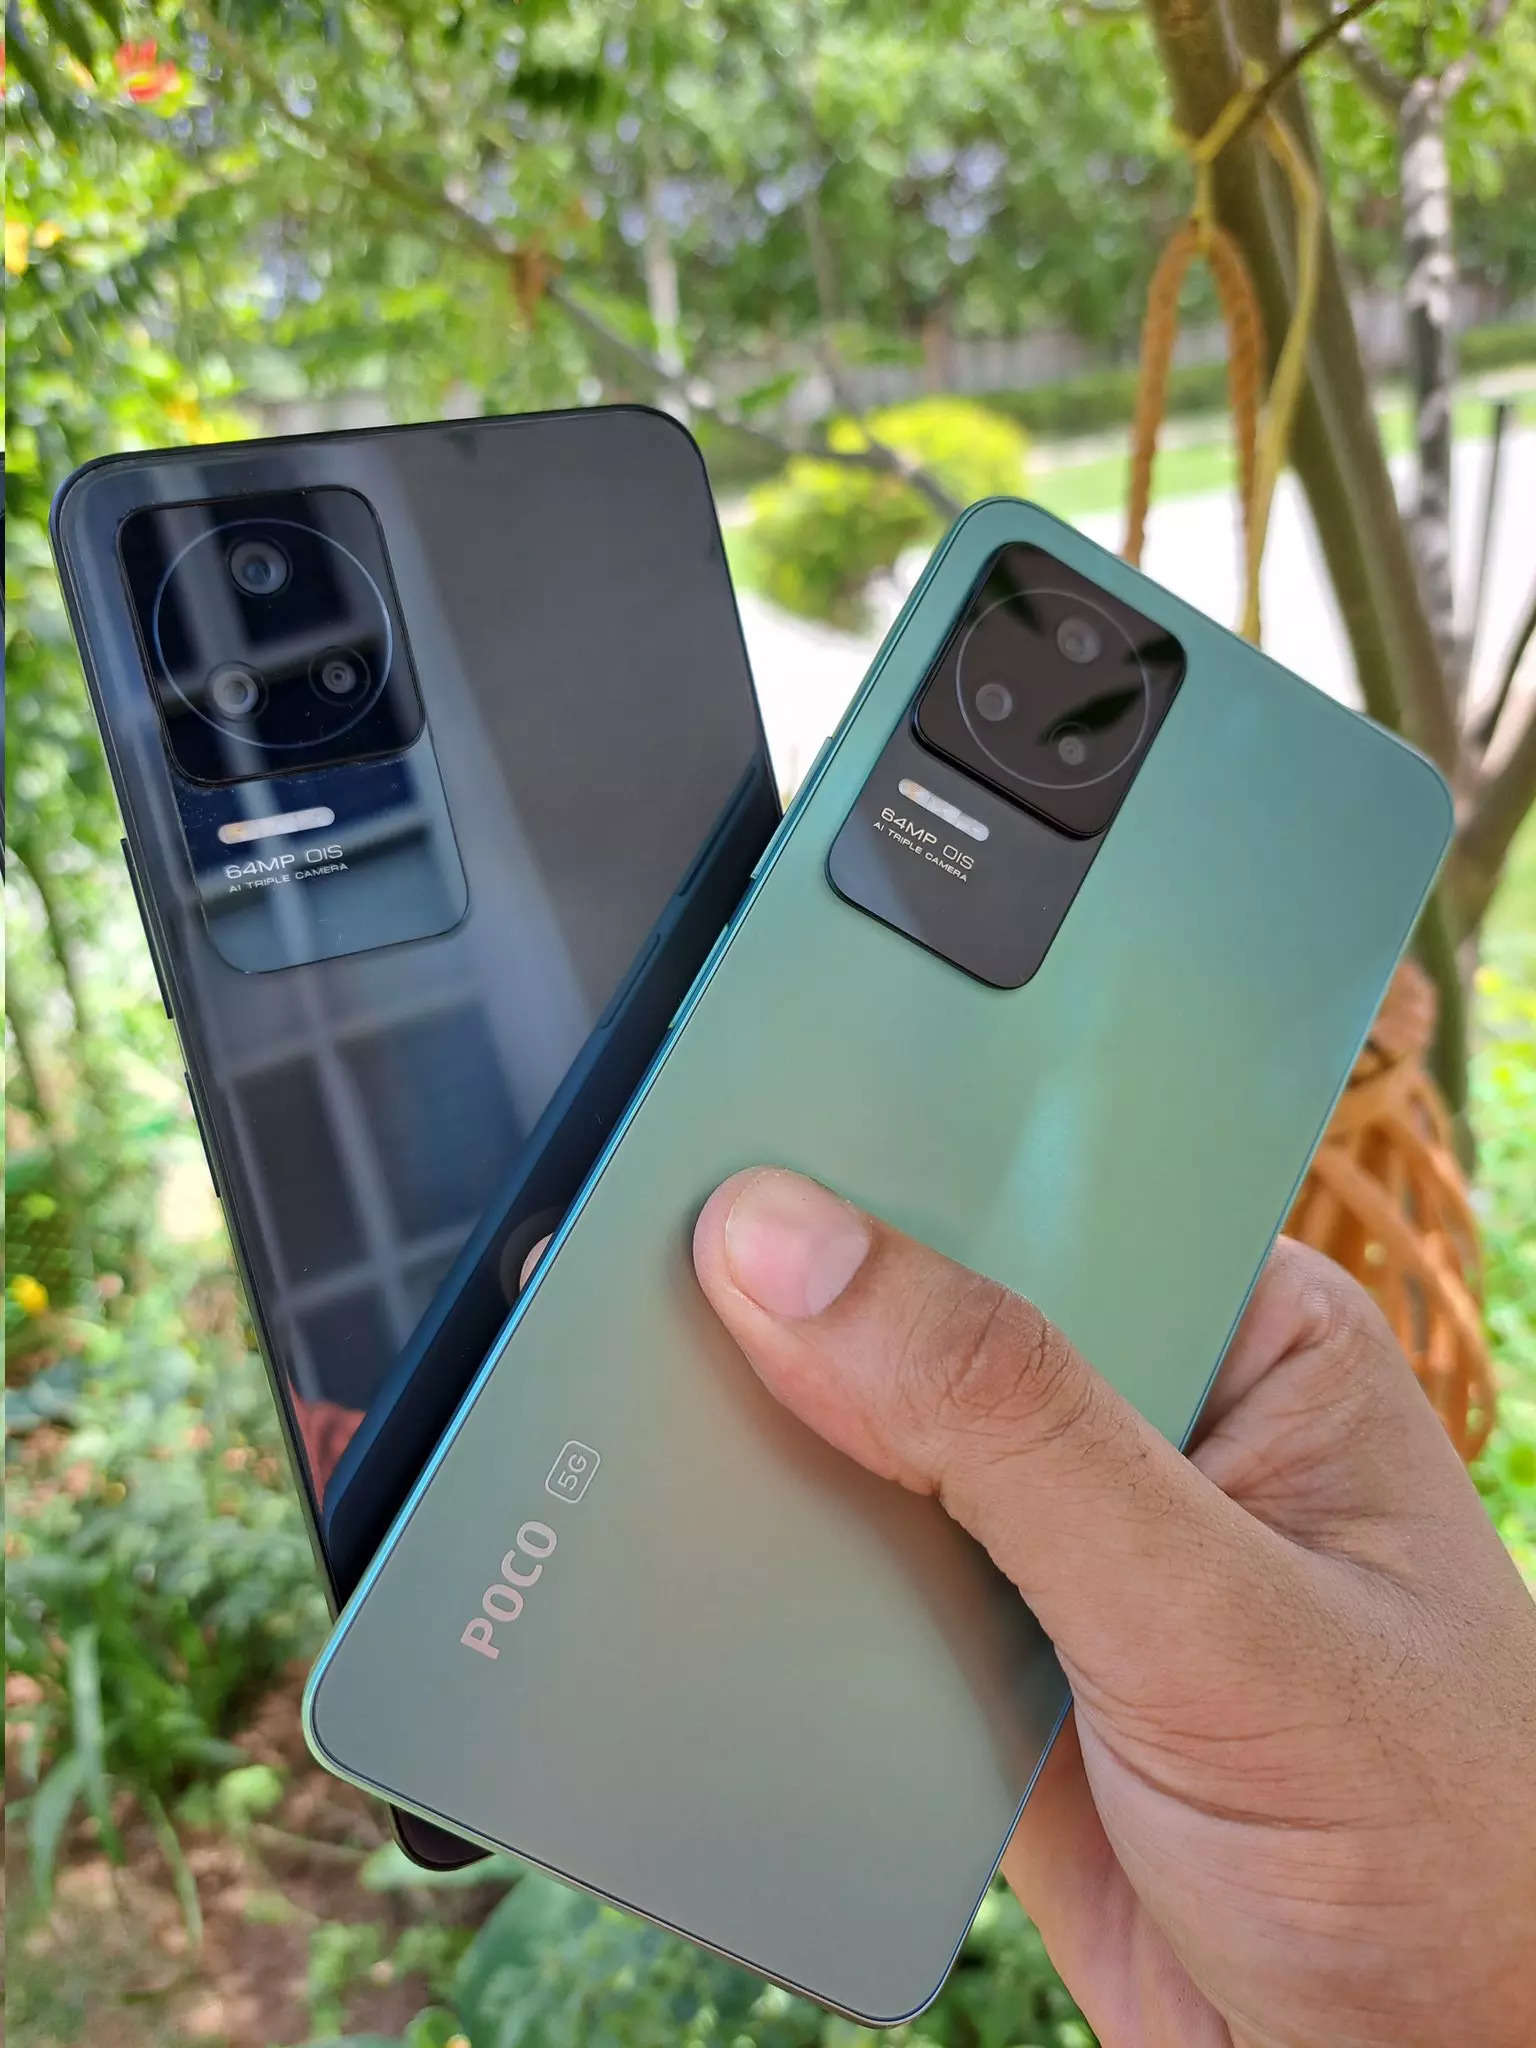 Poco F4 5G with 120Hz AMOLED Display, 64MP OIS Camera Launched in